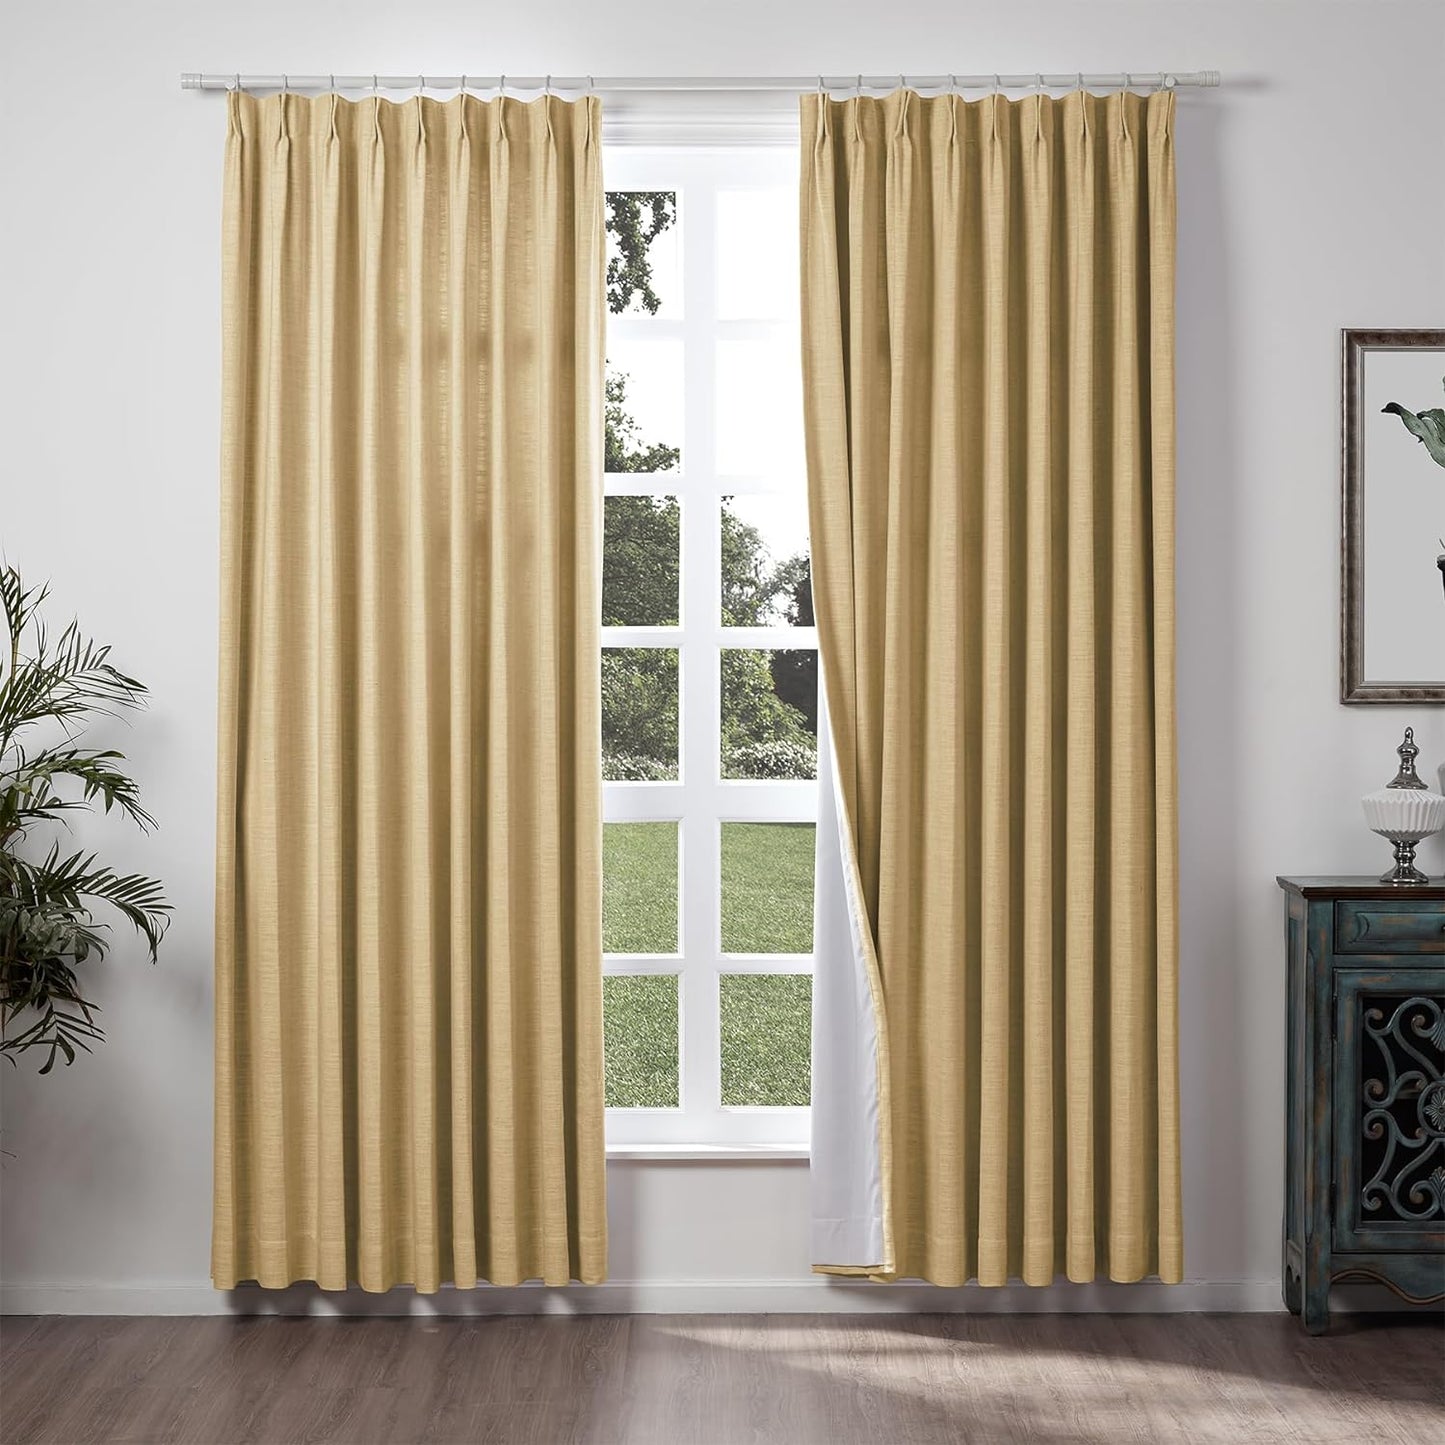 Chadmade 50" W X 63" L Polyester Linen Drape with Blackout Lining Pinch Pleat Curtain for Sliding Door Patio Door Living Room Bedroom, (1 Panel) Sand Beige Tallis Collection  ChadMade Khaki (28) 50Wx96L 